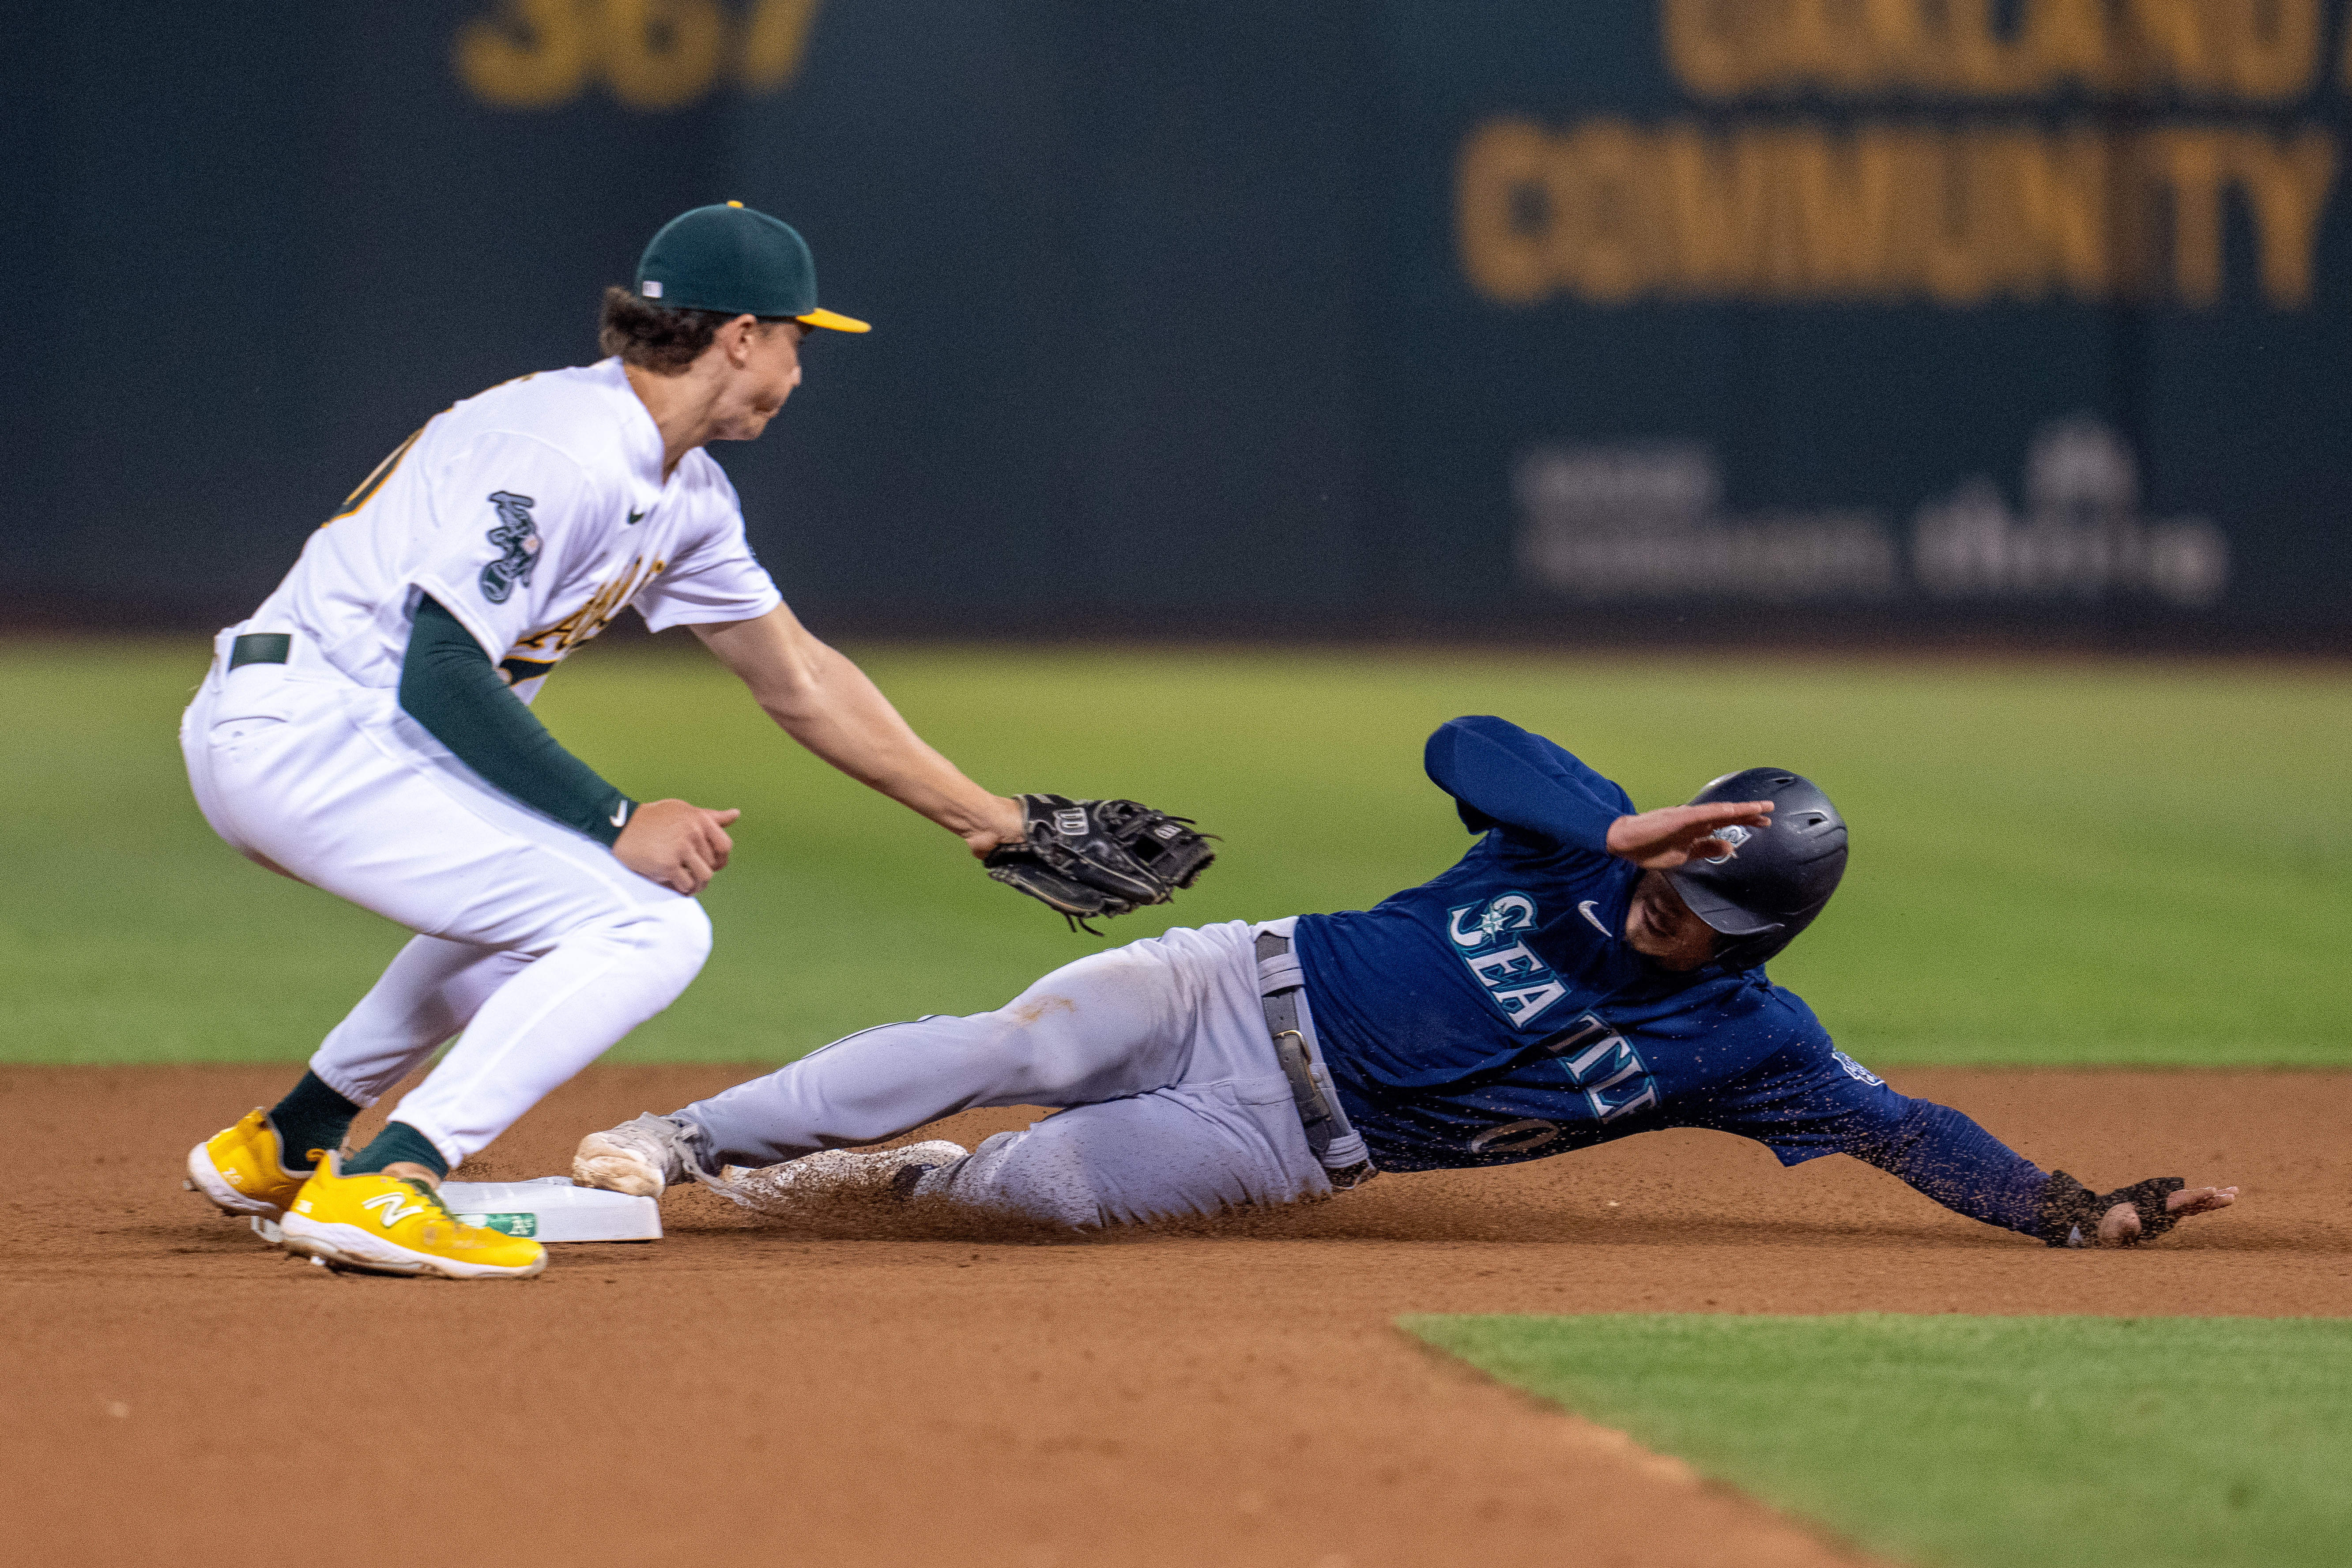 Mariners continue dominance of A's, win 7-2